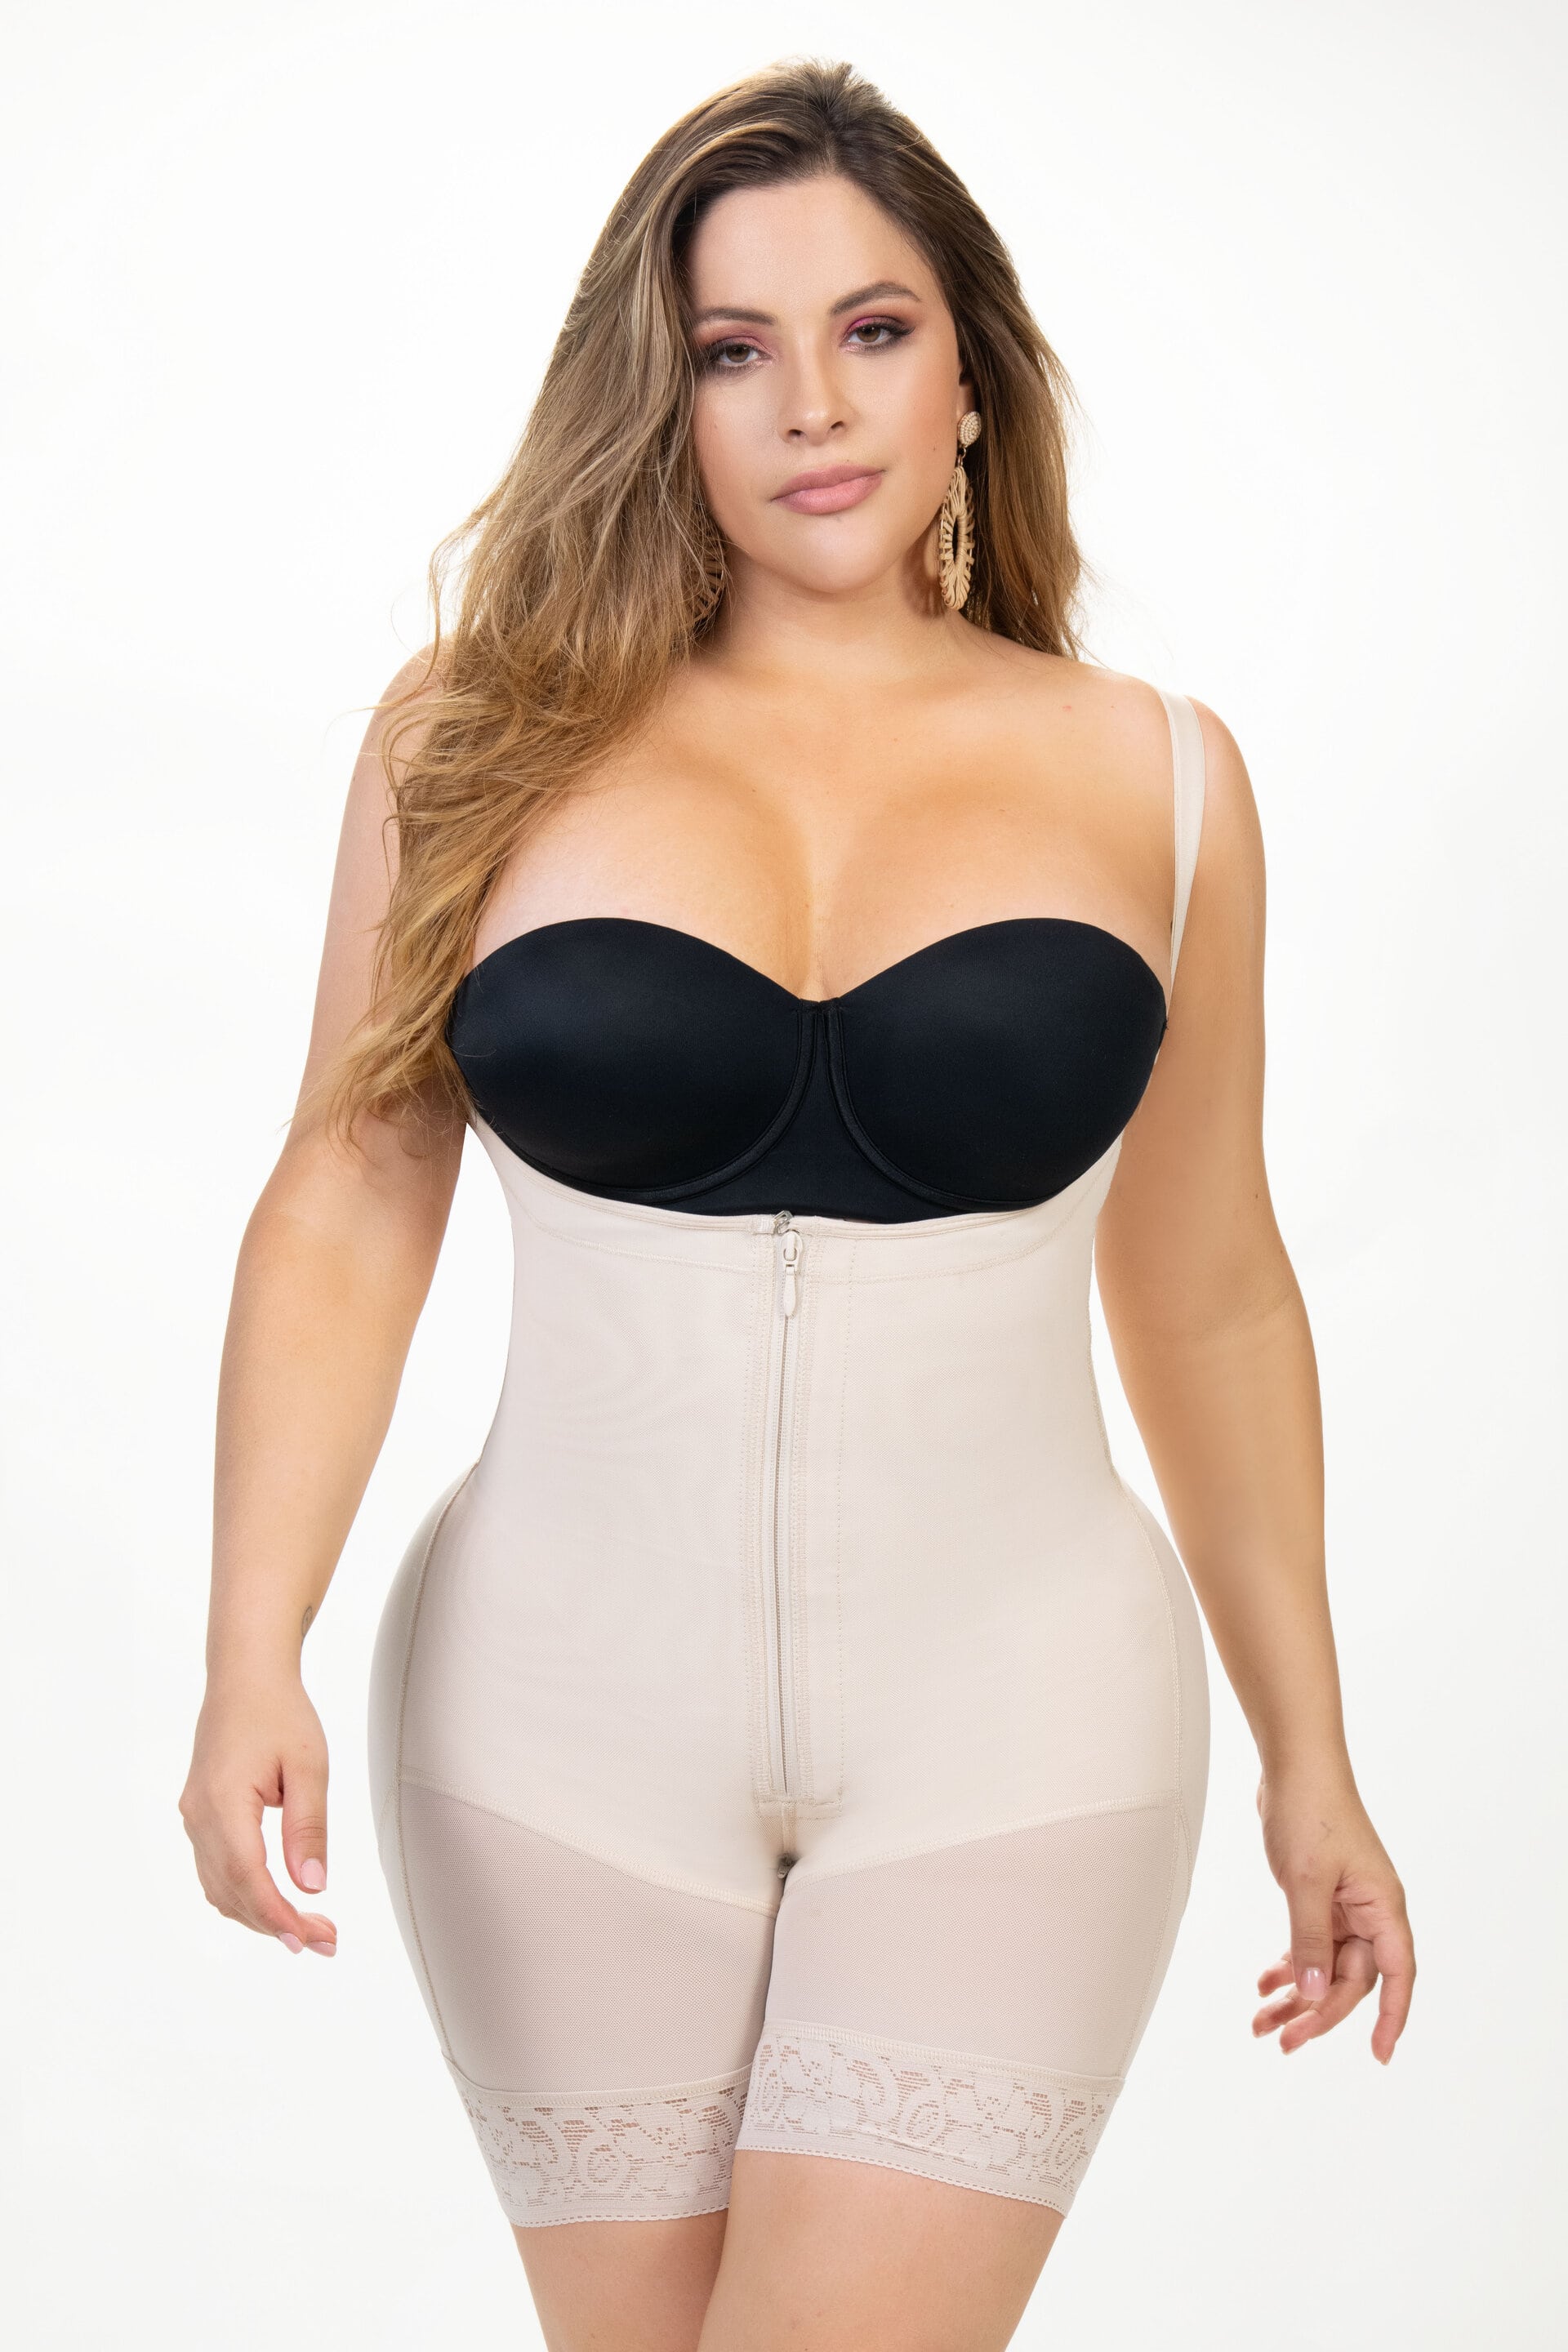 Body Shaper Guide: Choose the Best Plus Size Shapewear for Tummy Control